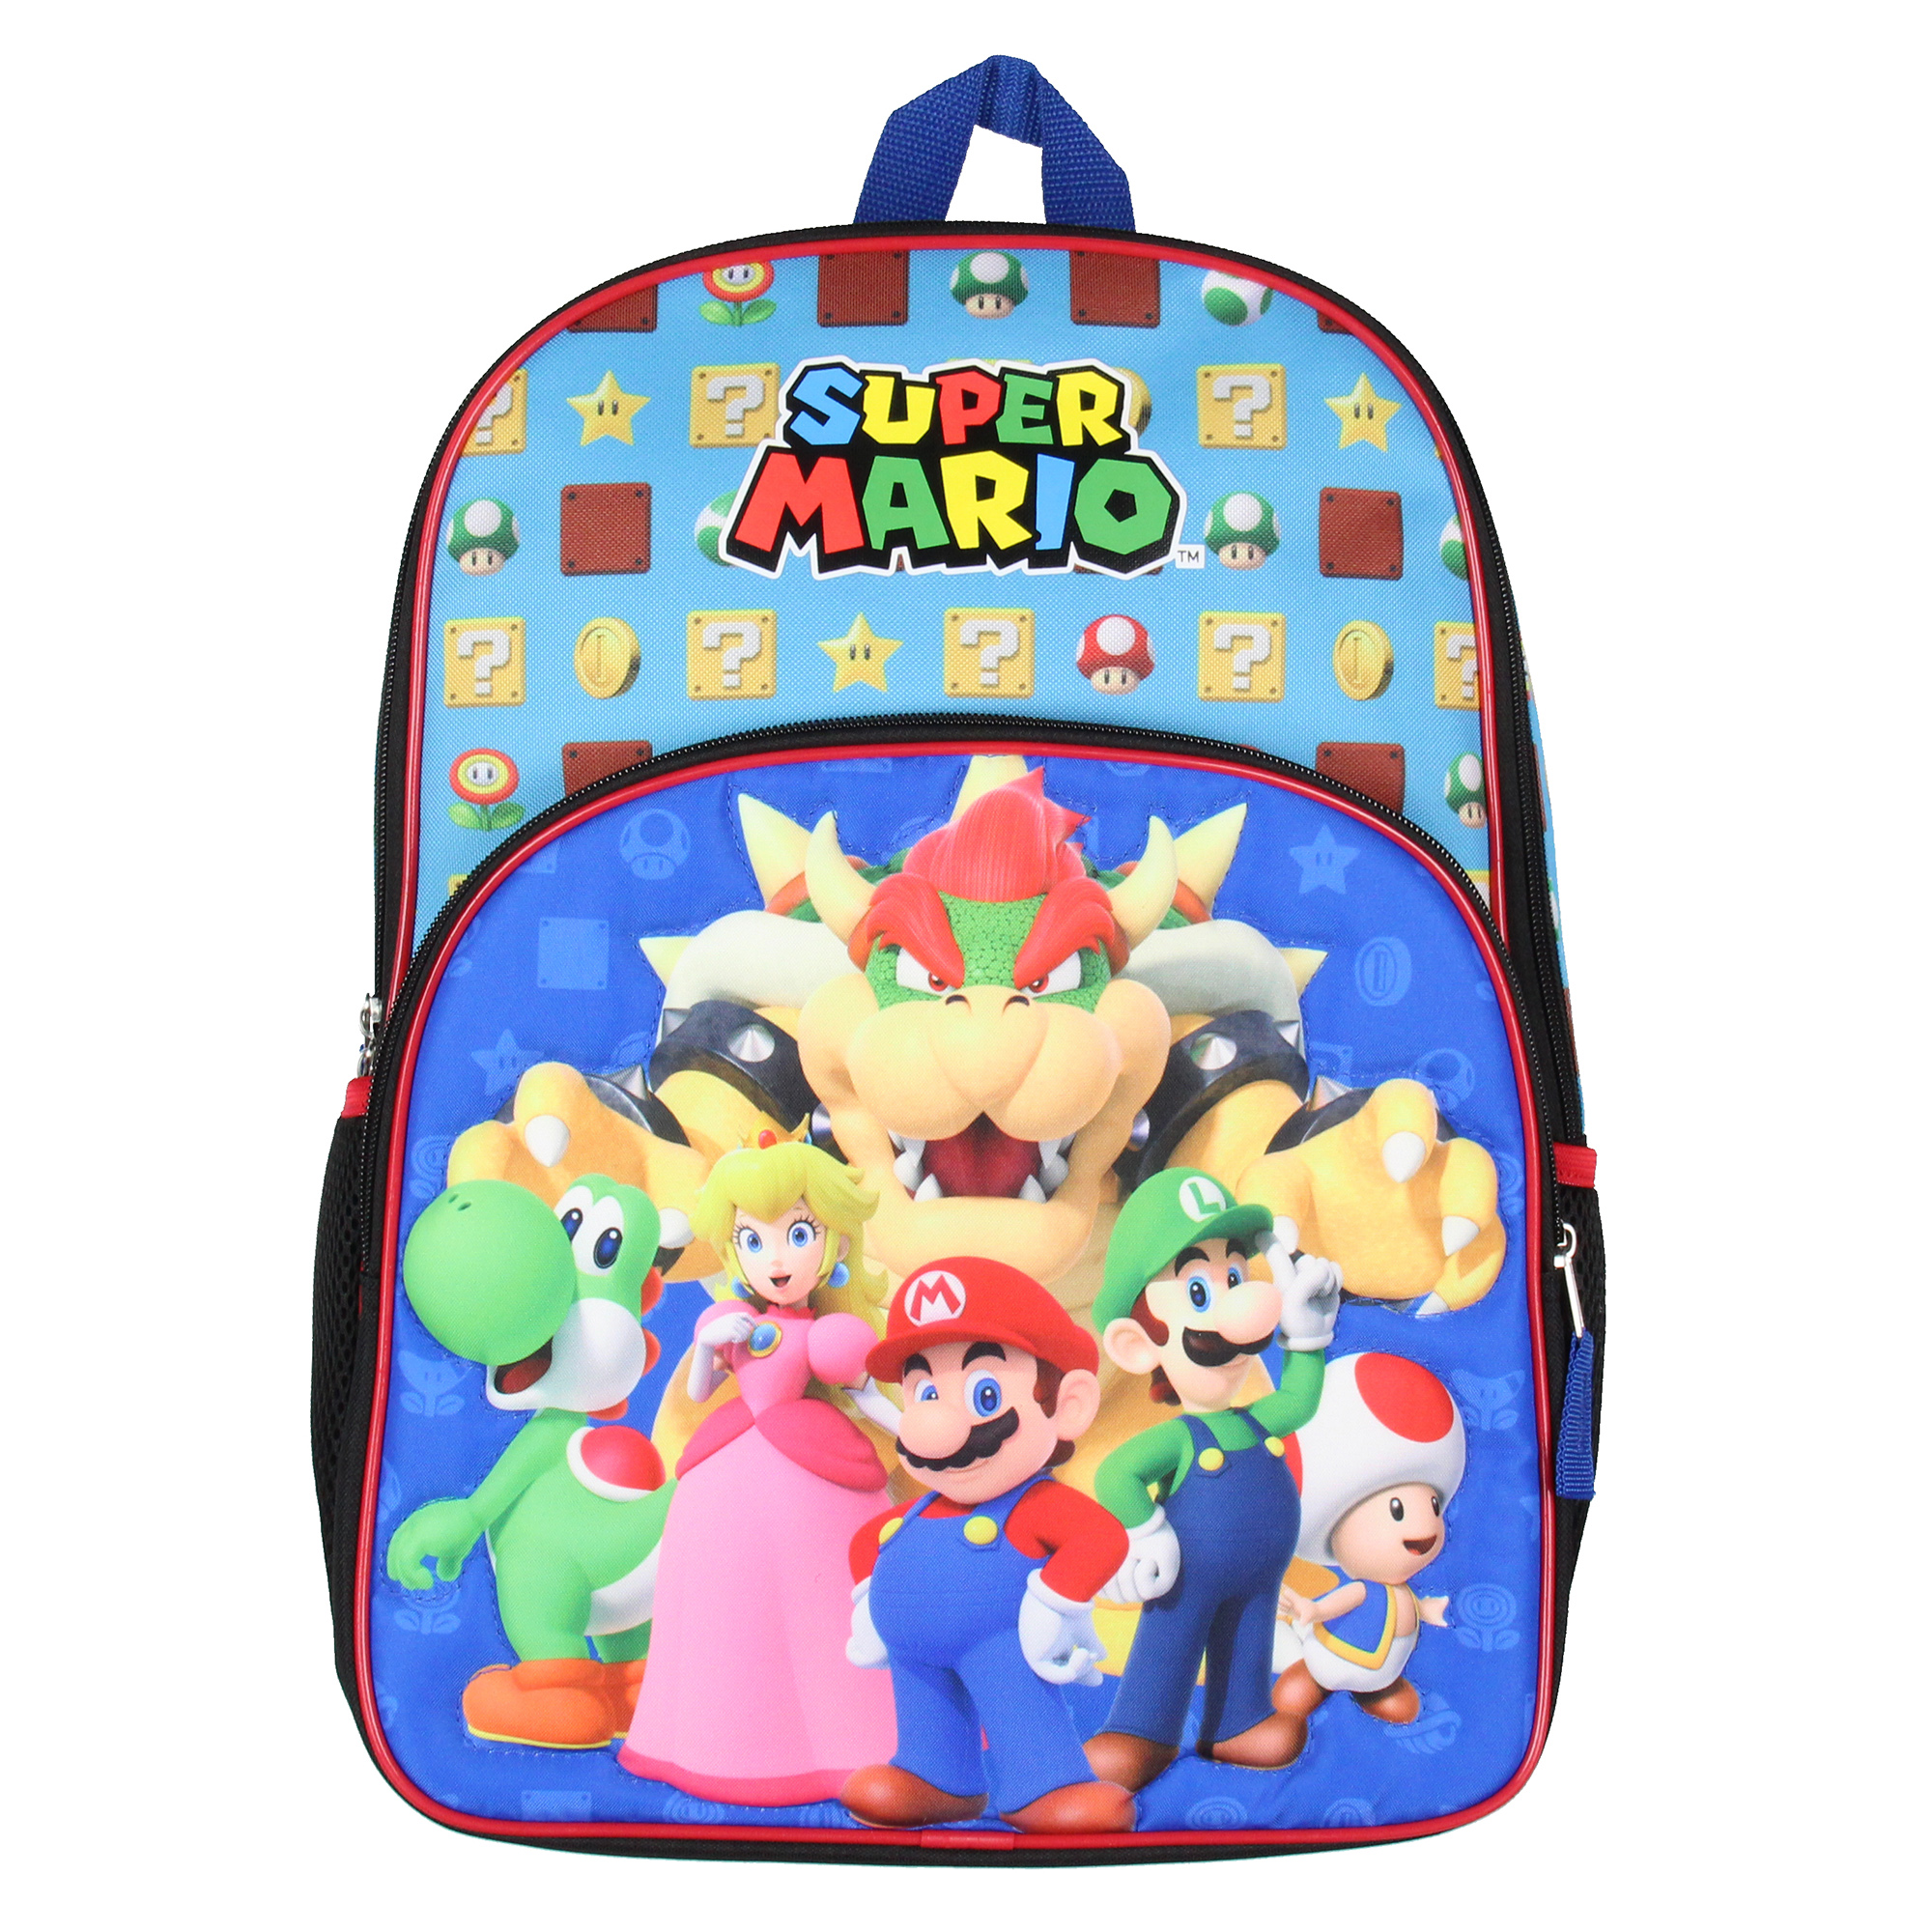 Nintendo Super Mario Backpack Bowser Luigi Princess Peach Yoshi 16" Kids Bag School Travel Backpack With Quilted Front Design